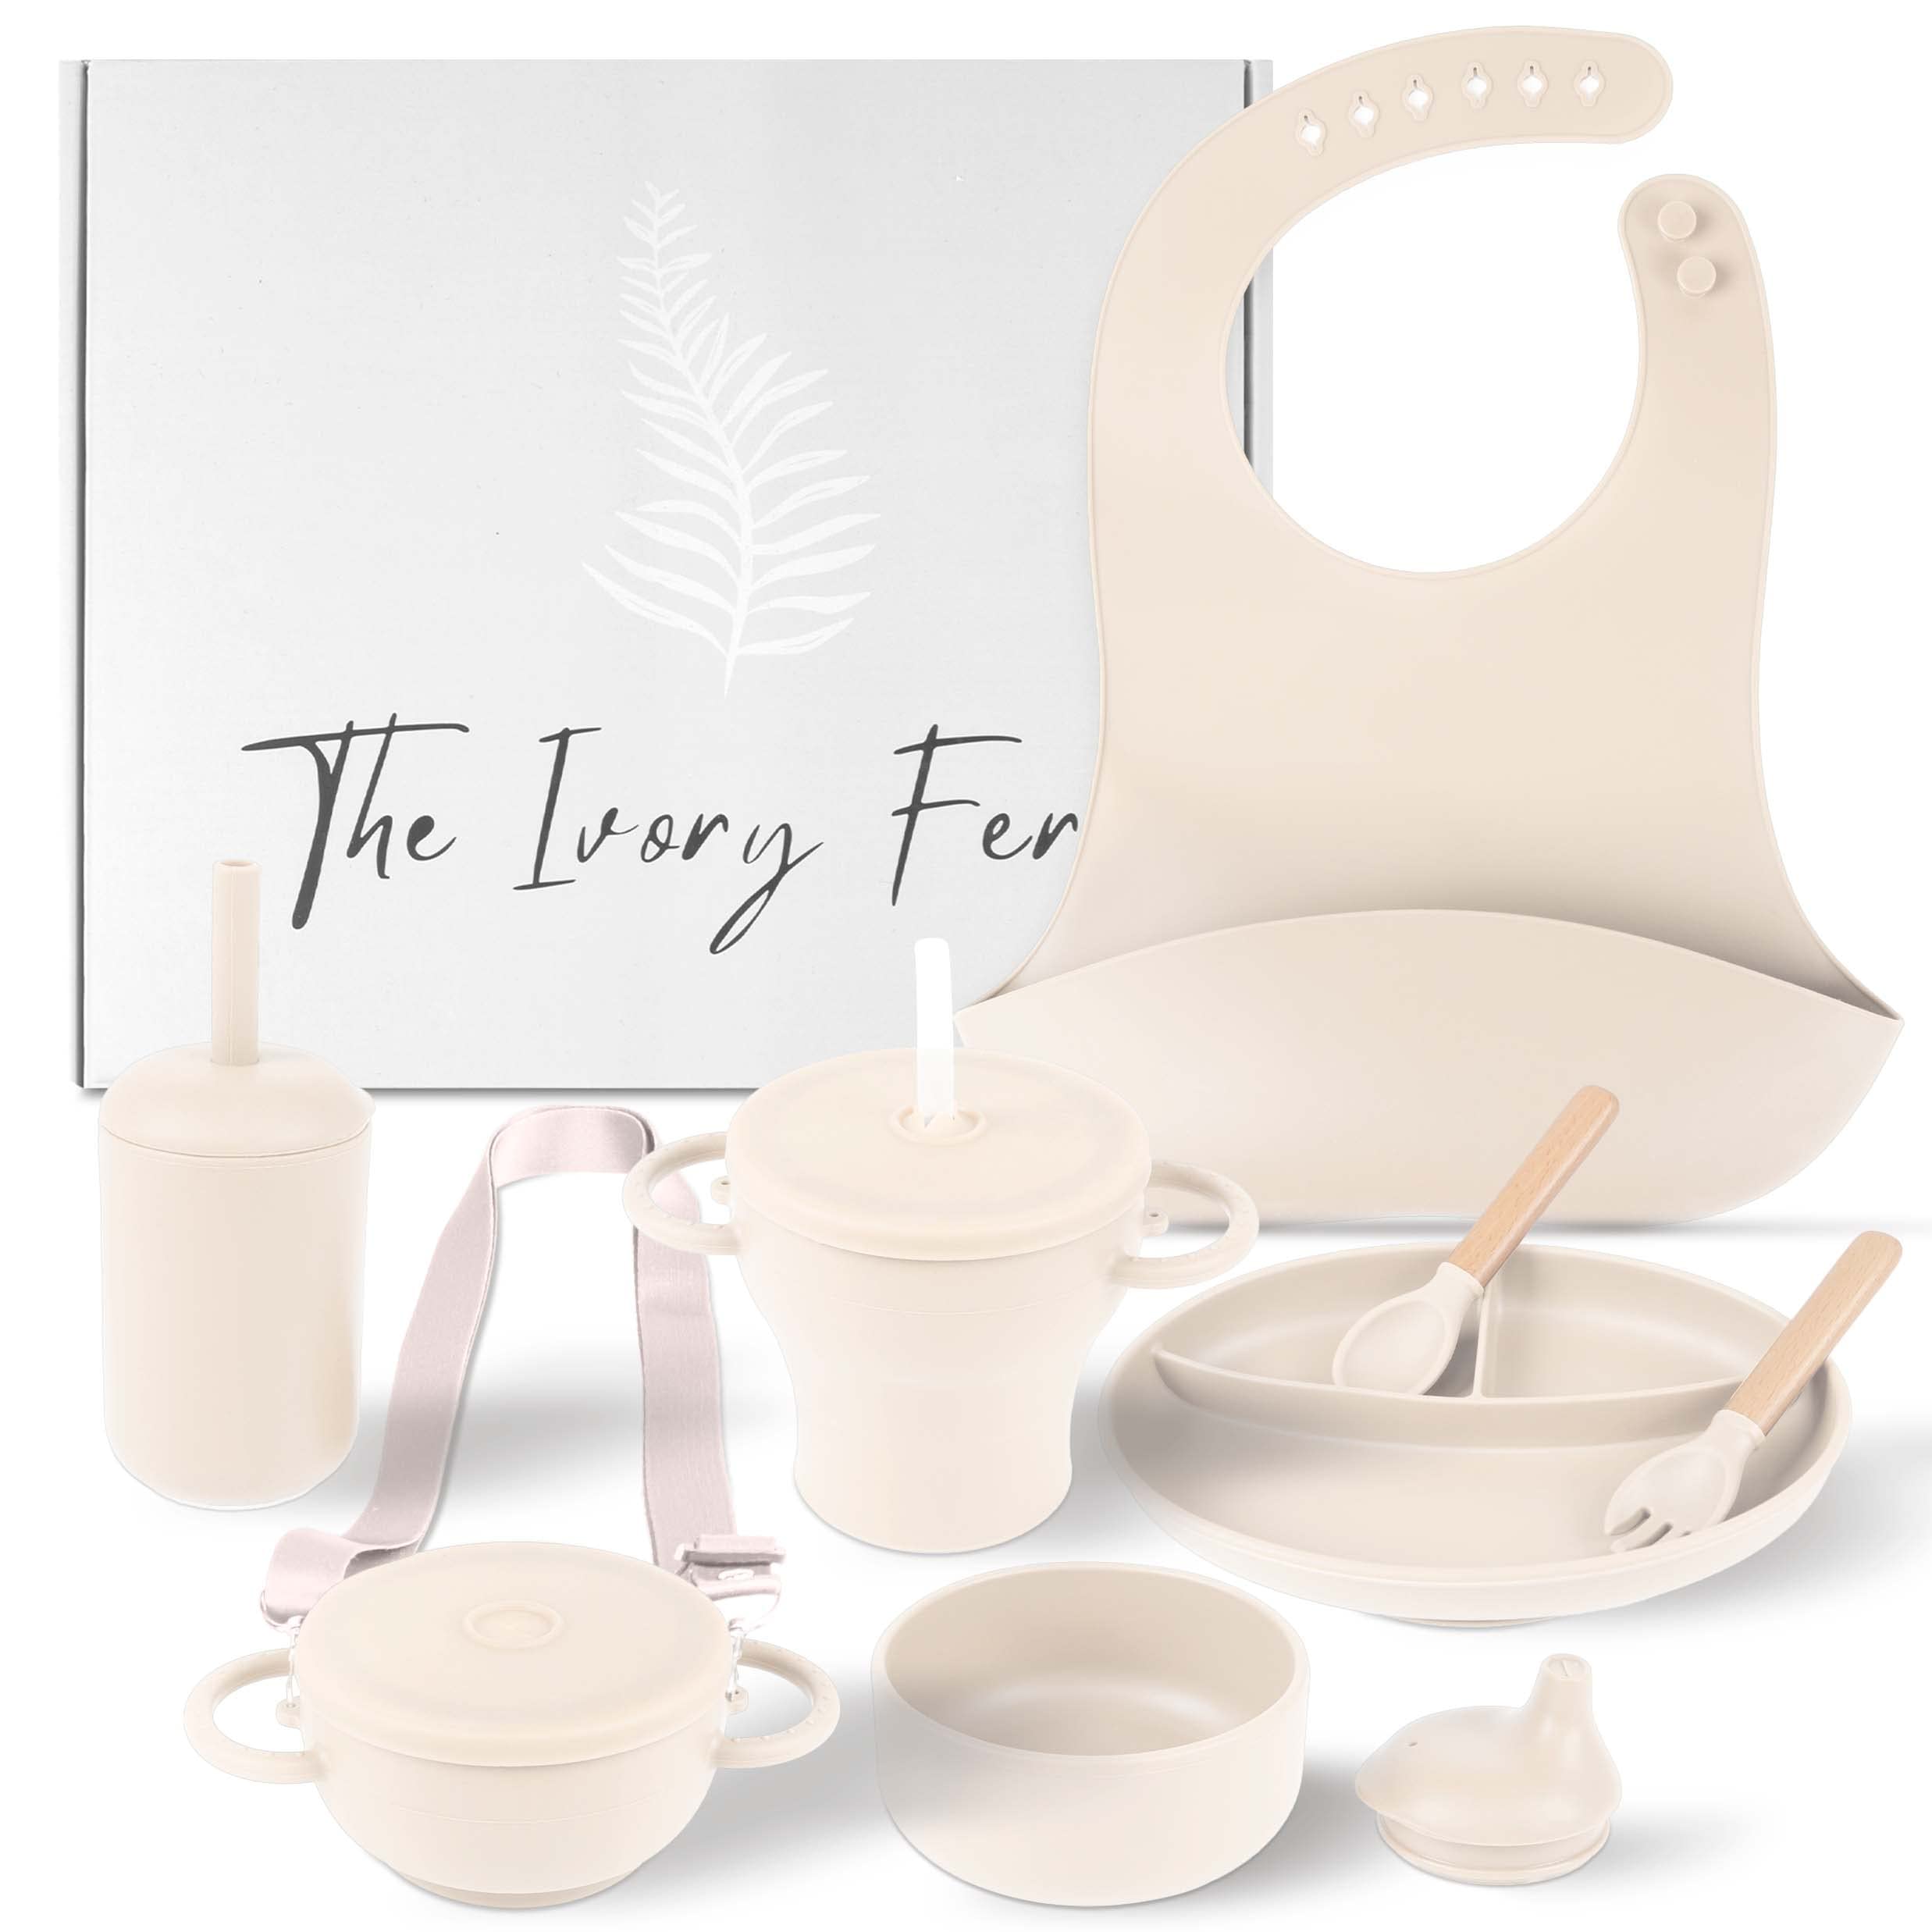 The Ivory Fern Silicone Baby Feeding Set,Baby Plates and Bowls Set, Bib, Convertible Drinking, Snack Cups, Feeding supplies